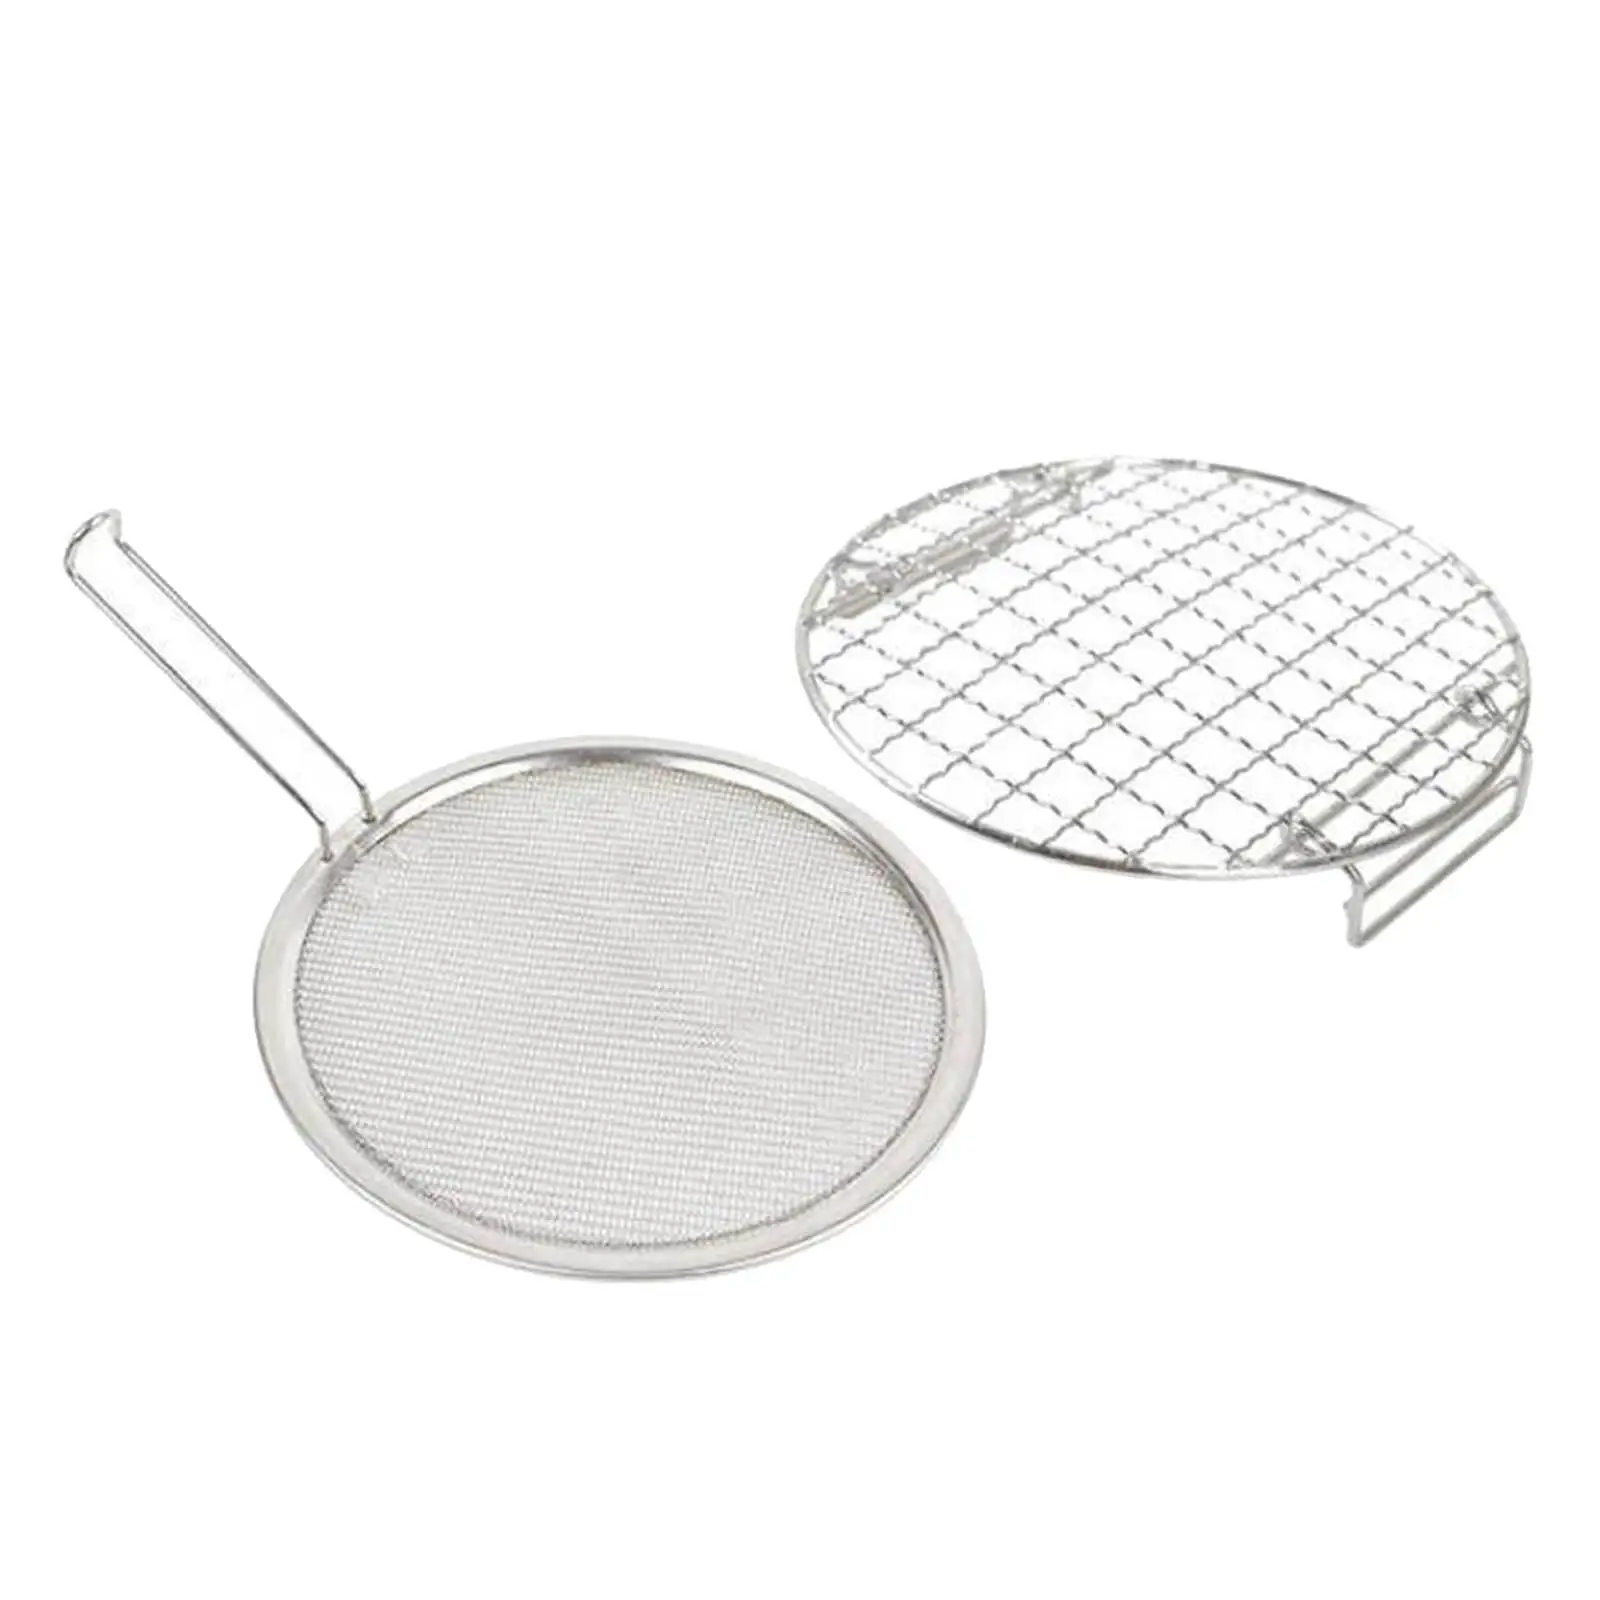 Barbecue Grill Rack Round Multifunctional Grill Net for Home, Hiking, Cooking,